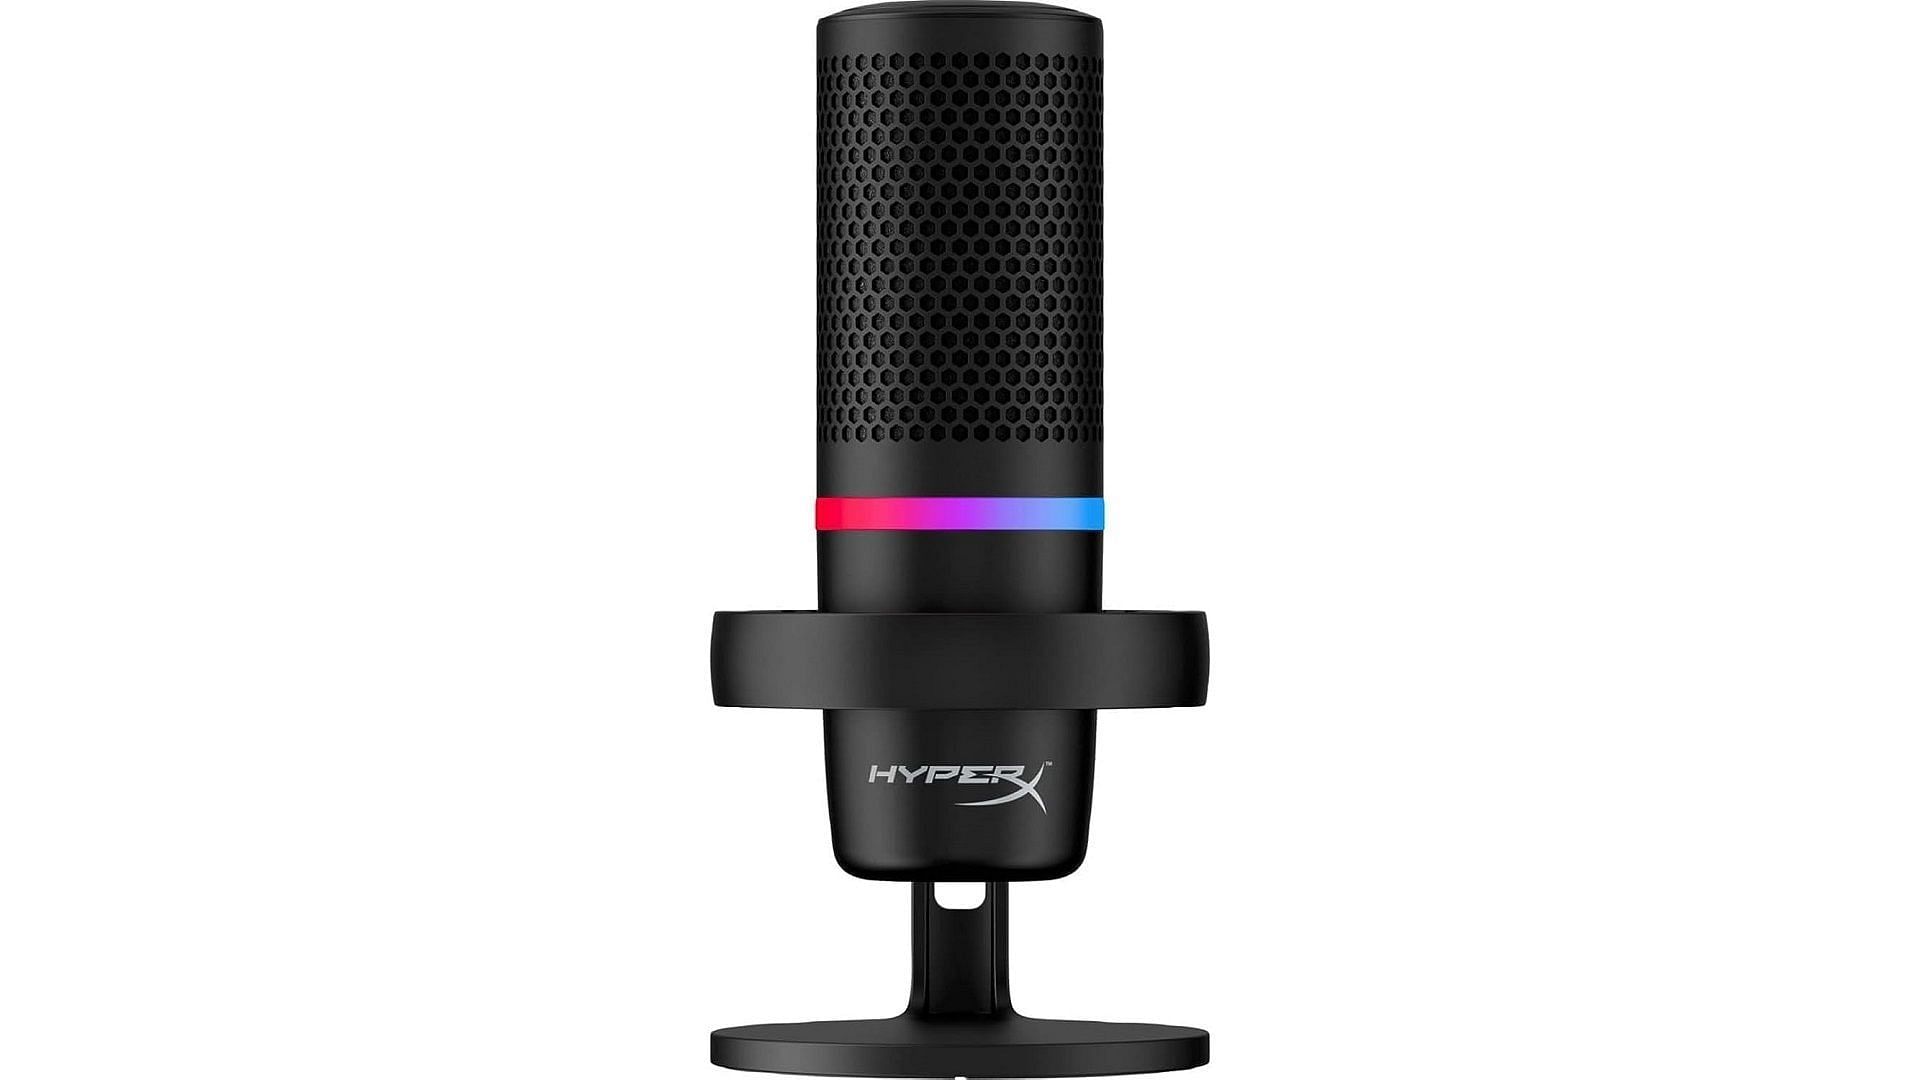 HyperX DuoCast microphone with RGB effects (Image via Amazon)